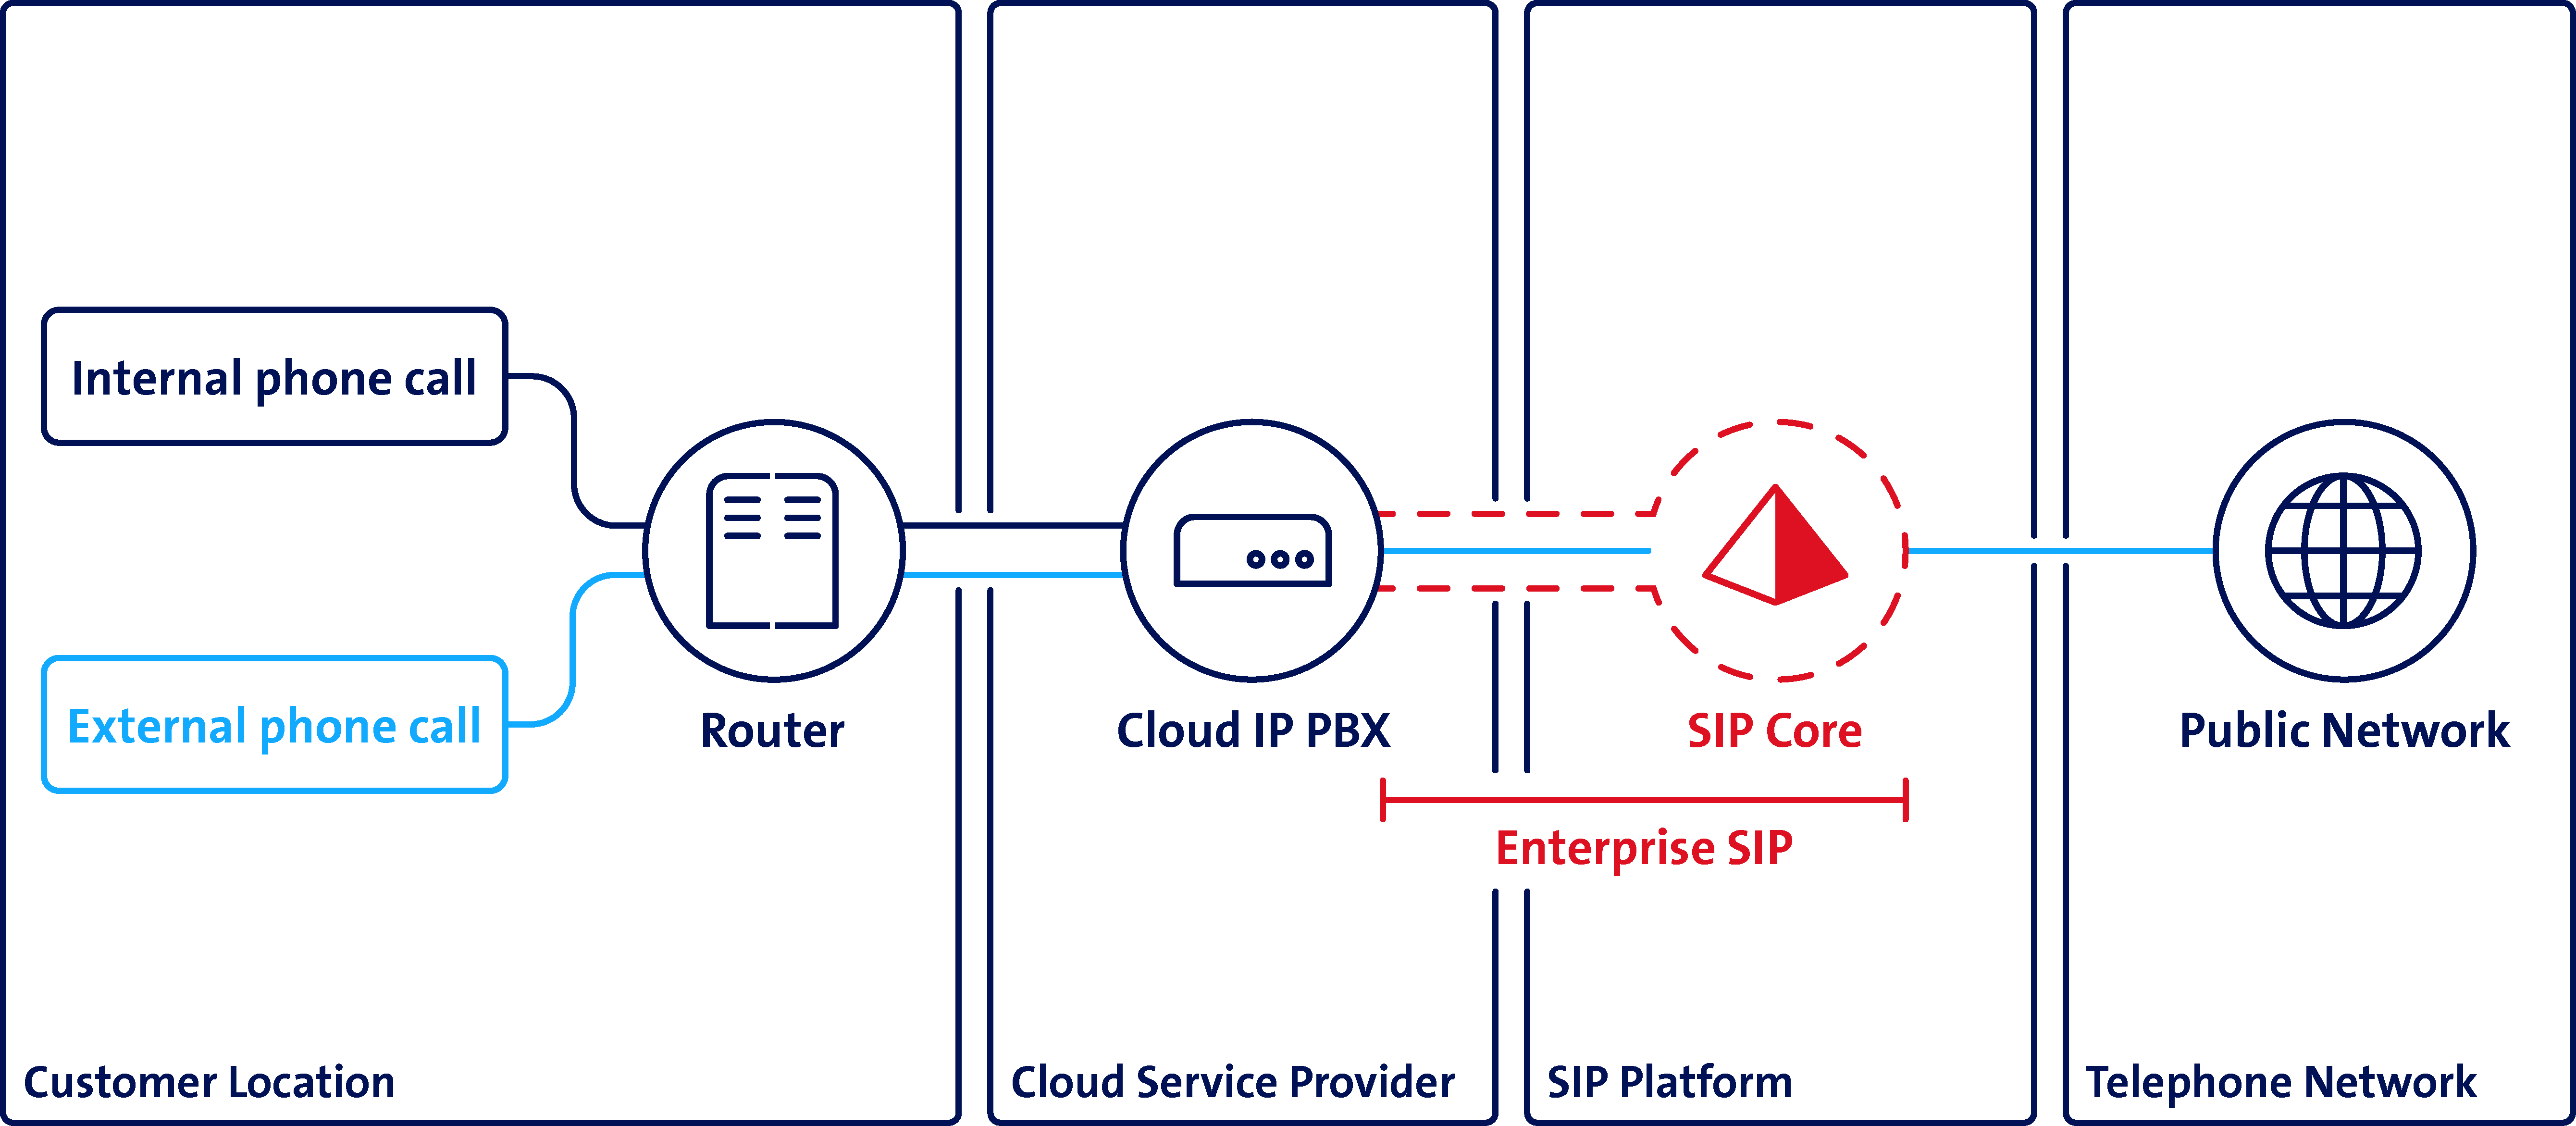 Enterprise SIP Cloud: connects your MS Teams PBX system to the Public Switched Telephone Network. 